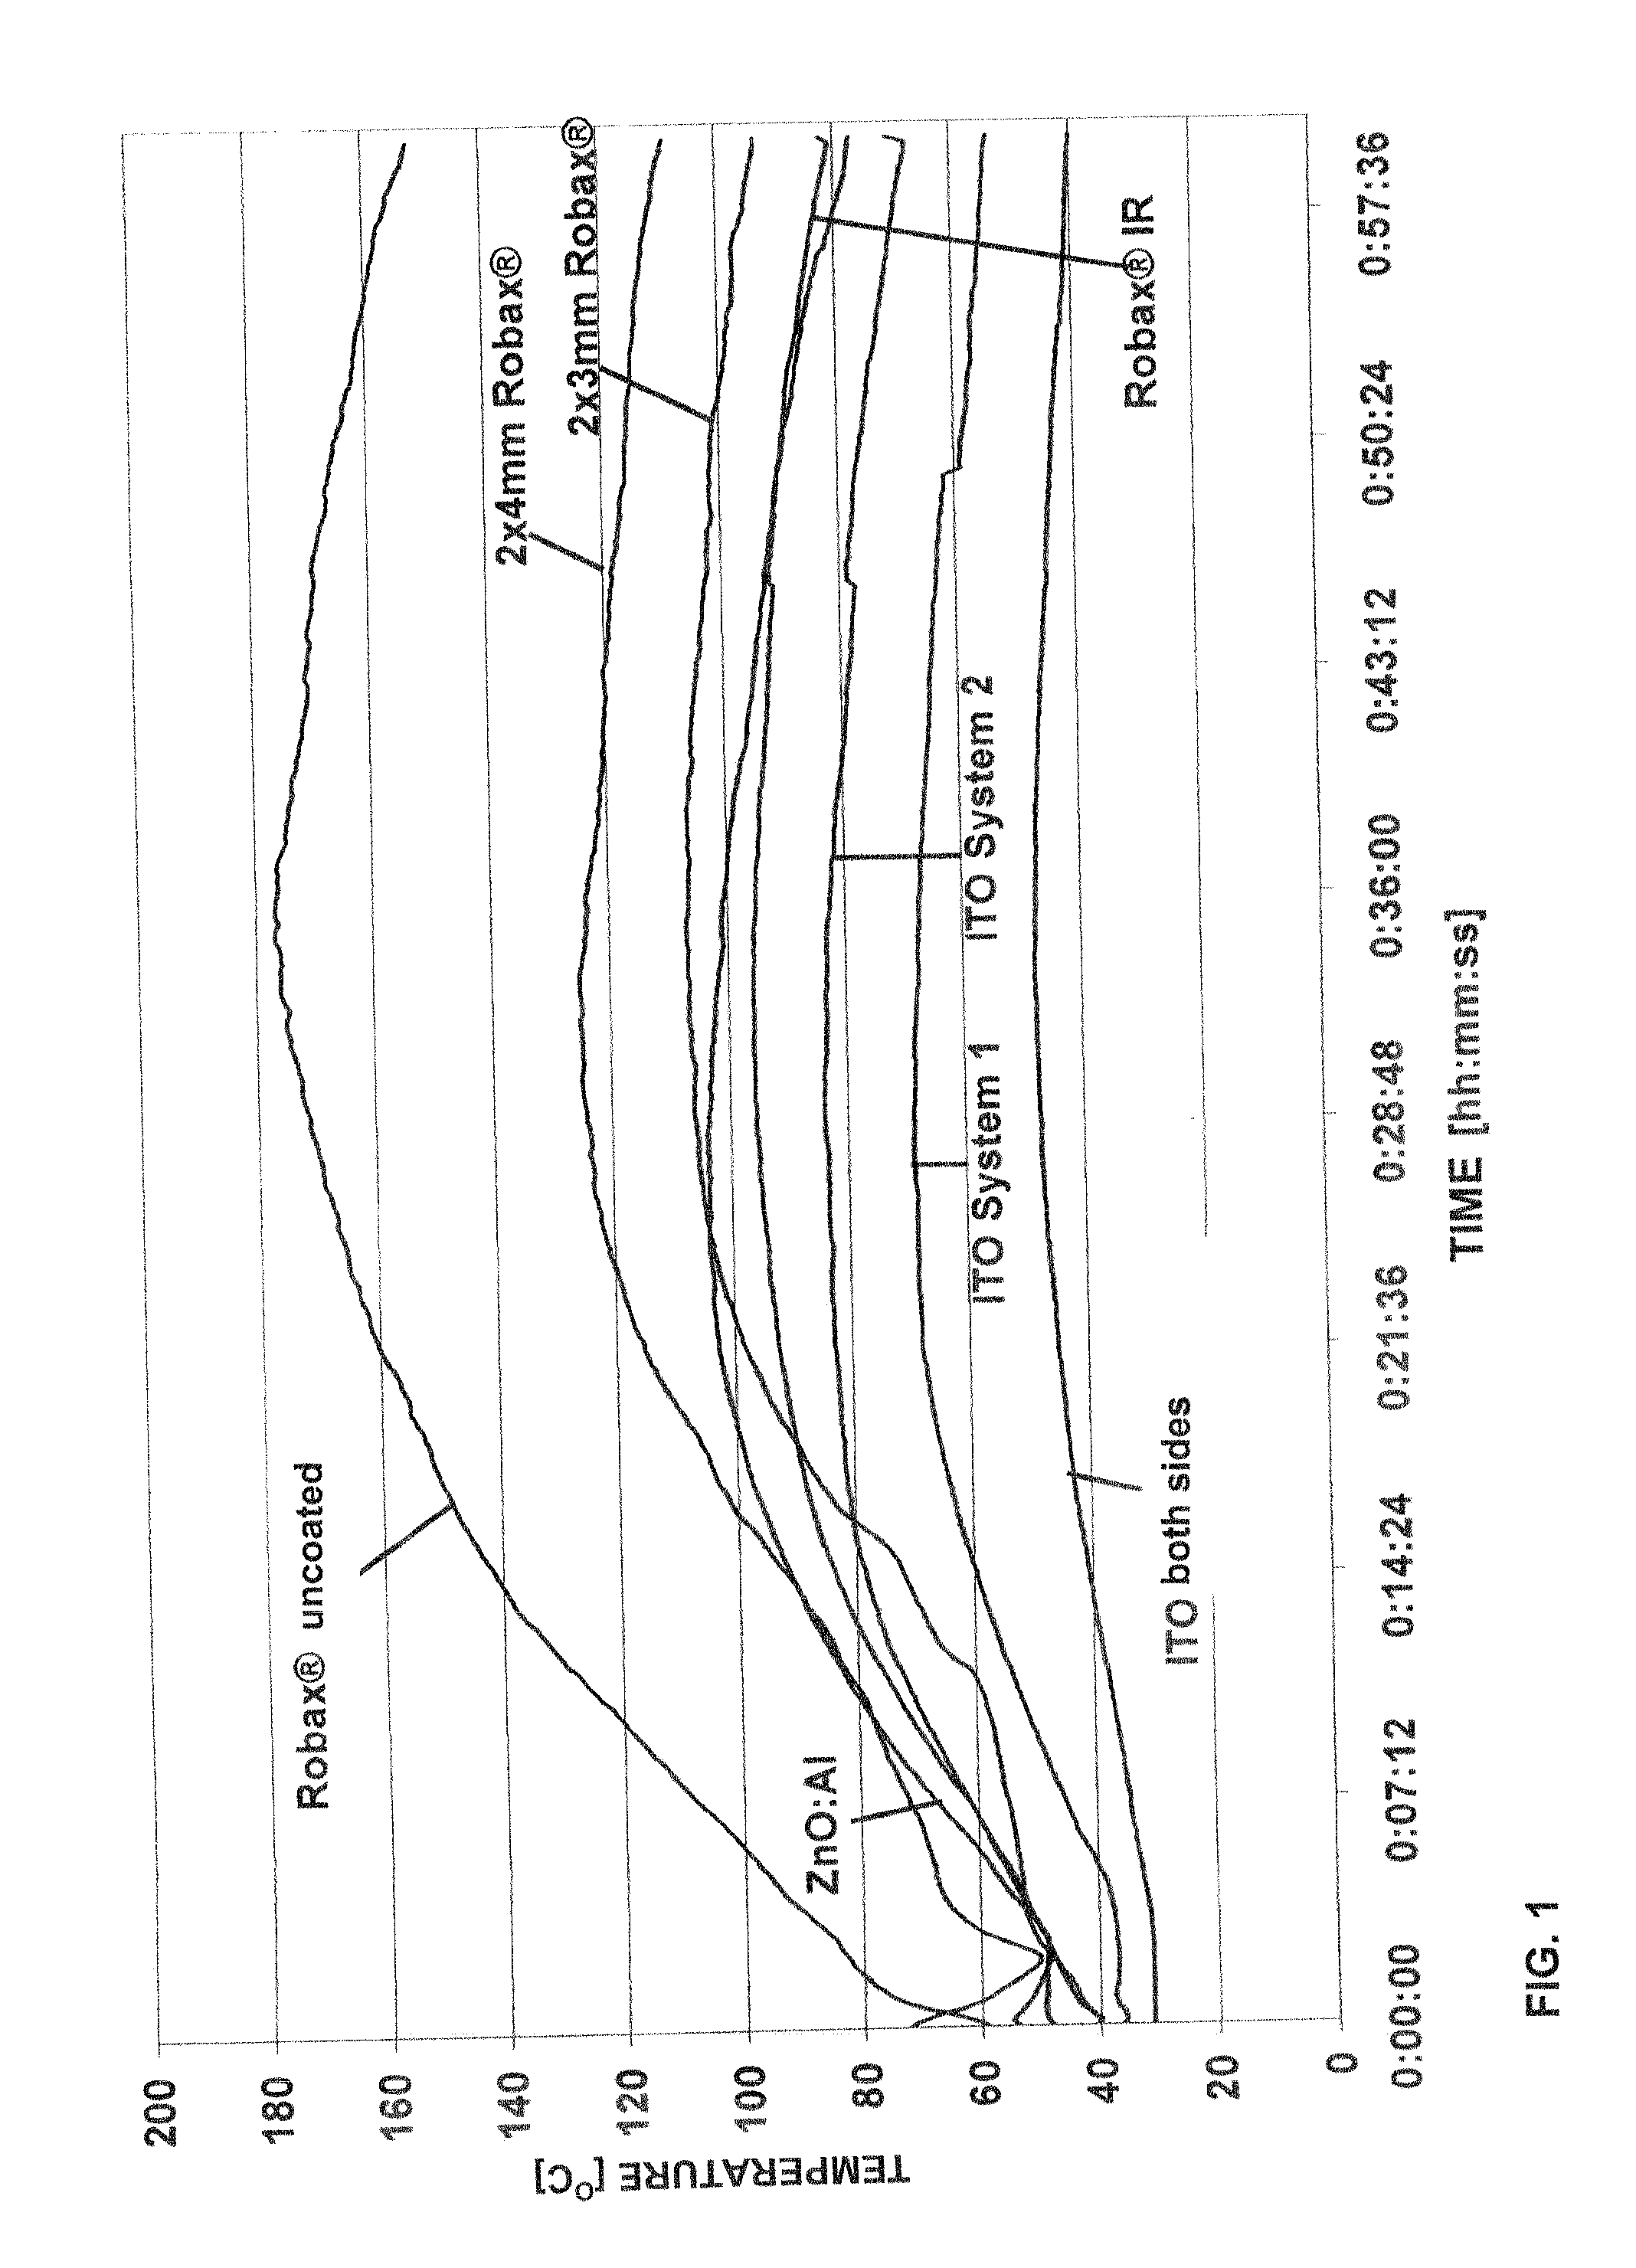 Arrangement for reflection of heat radiation, process of making same and uses of same